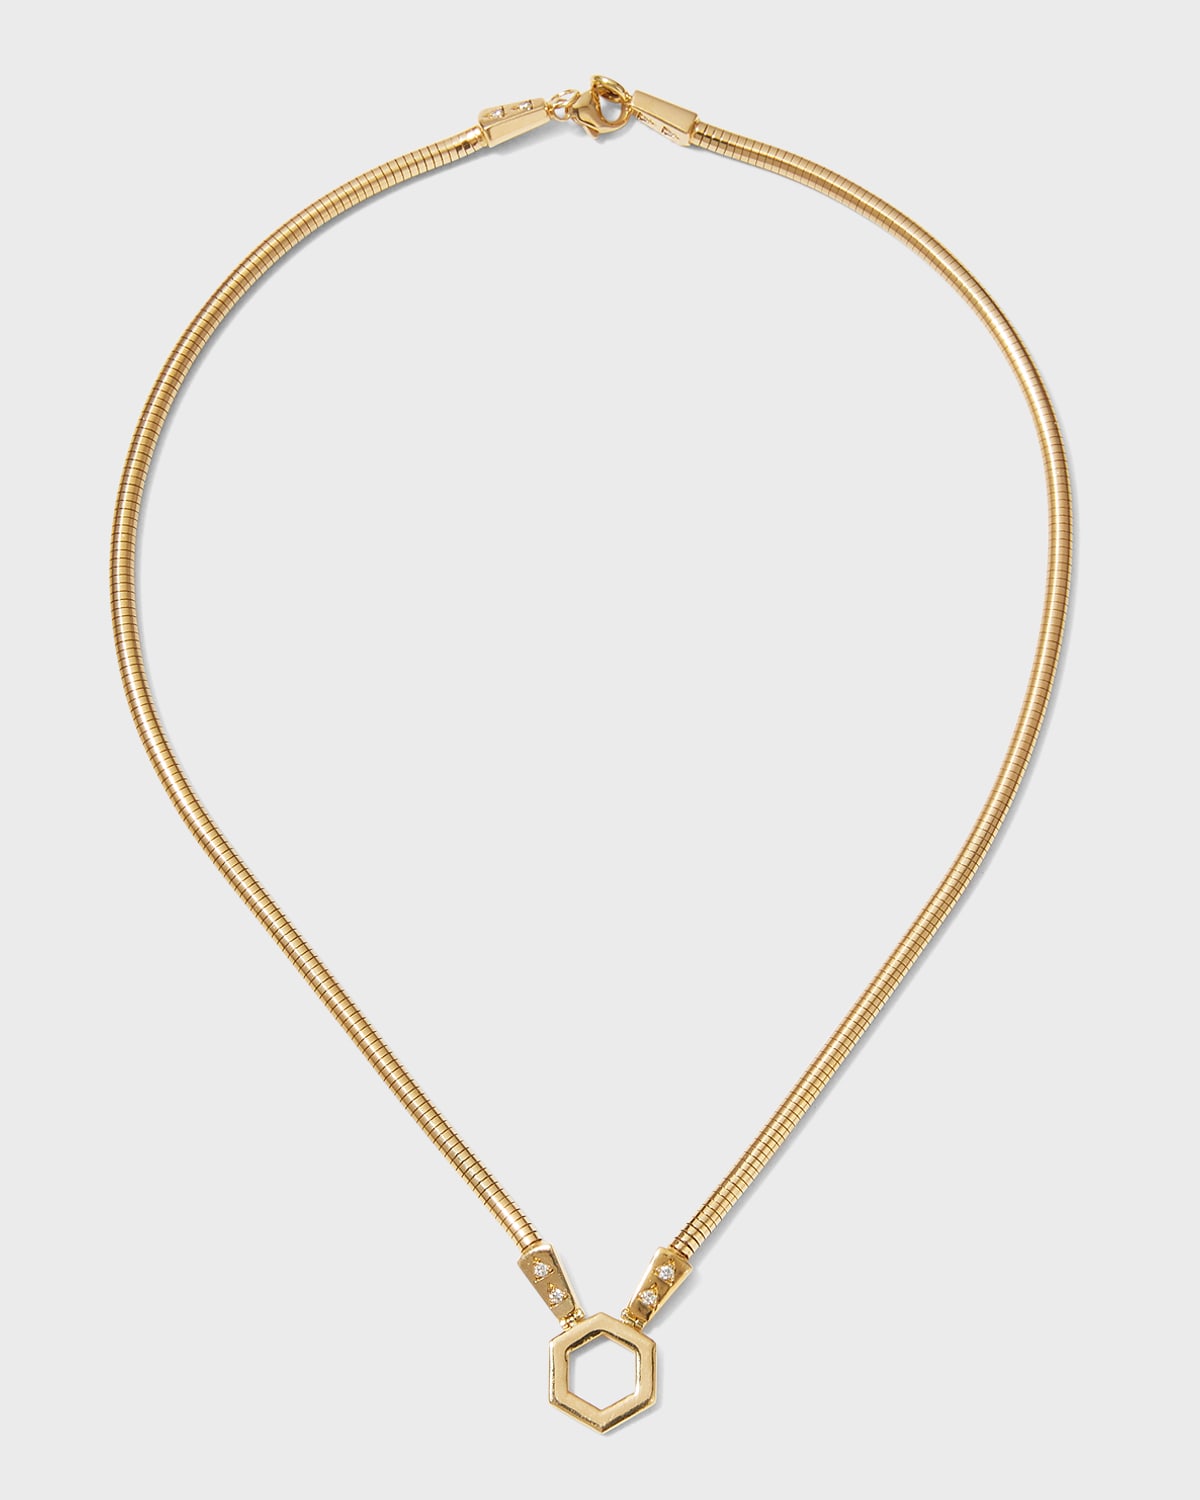 18k Yellow Gold Cleo's Snake Foundation Necklace with Diamonds